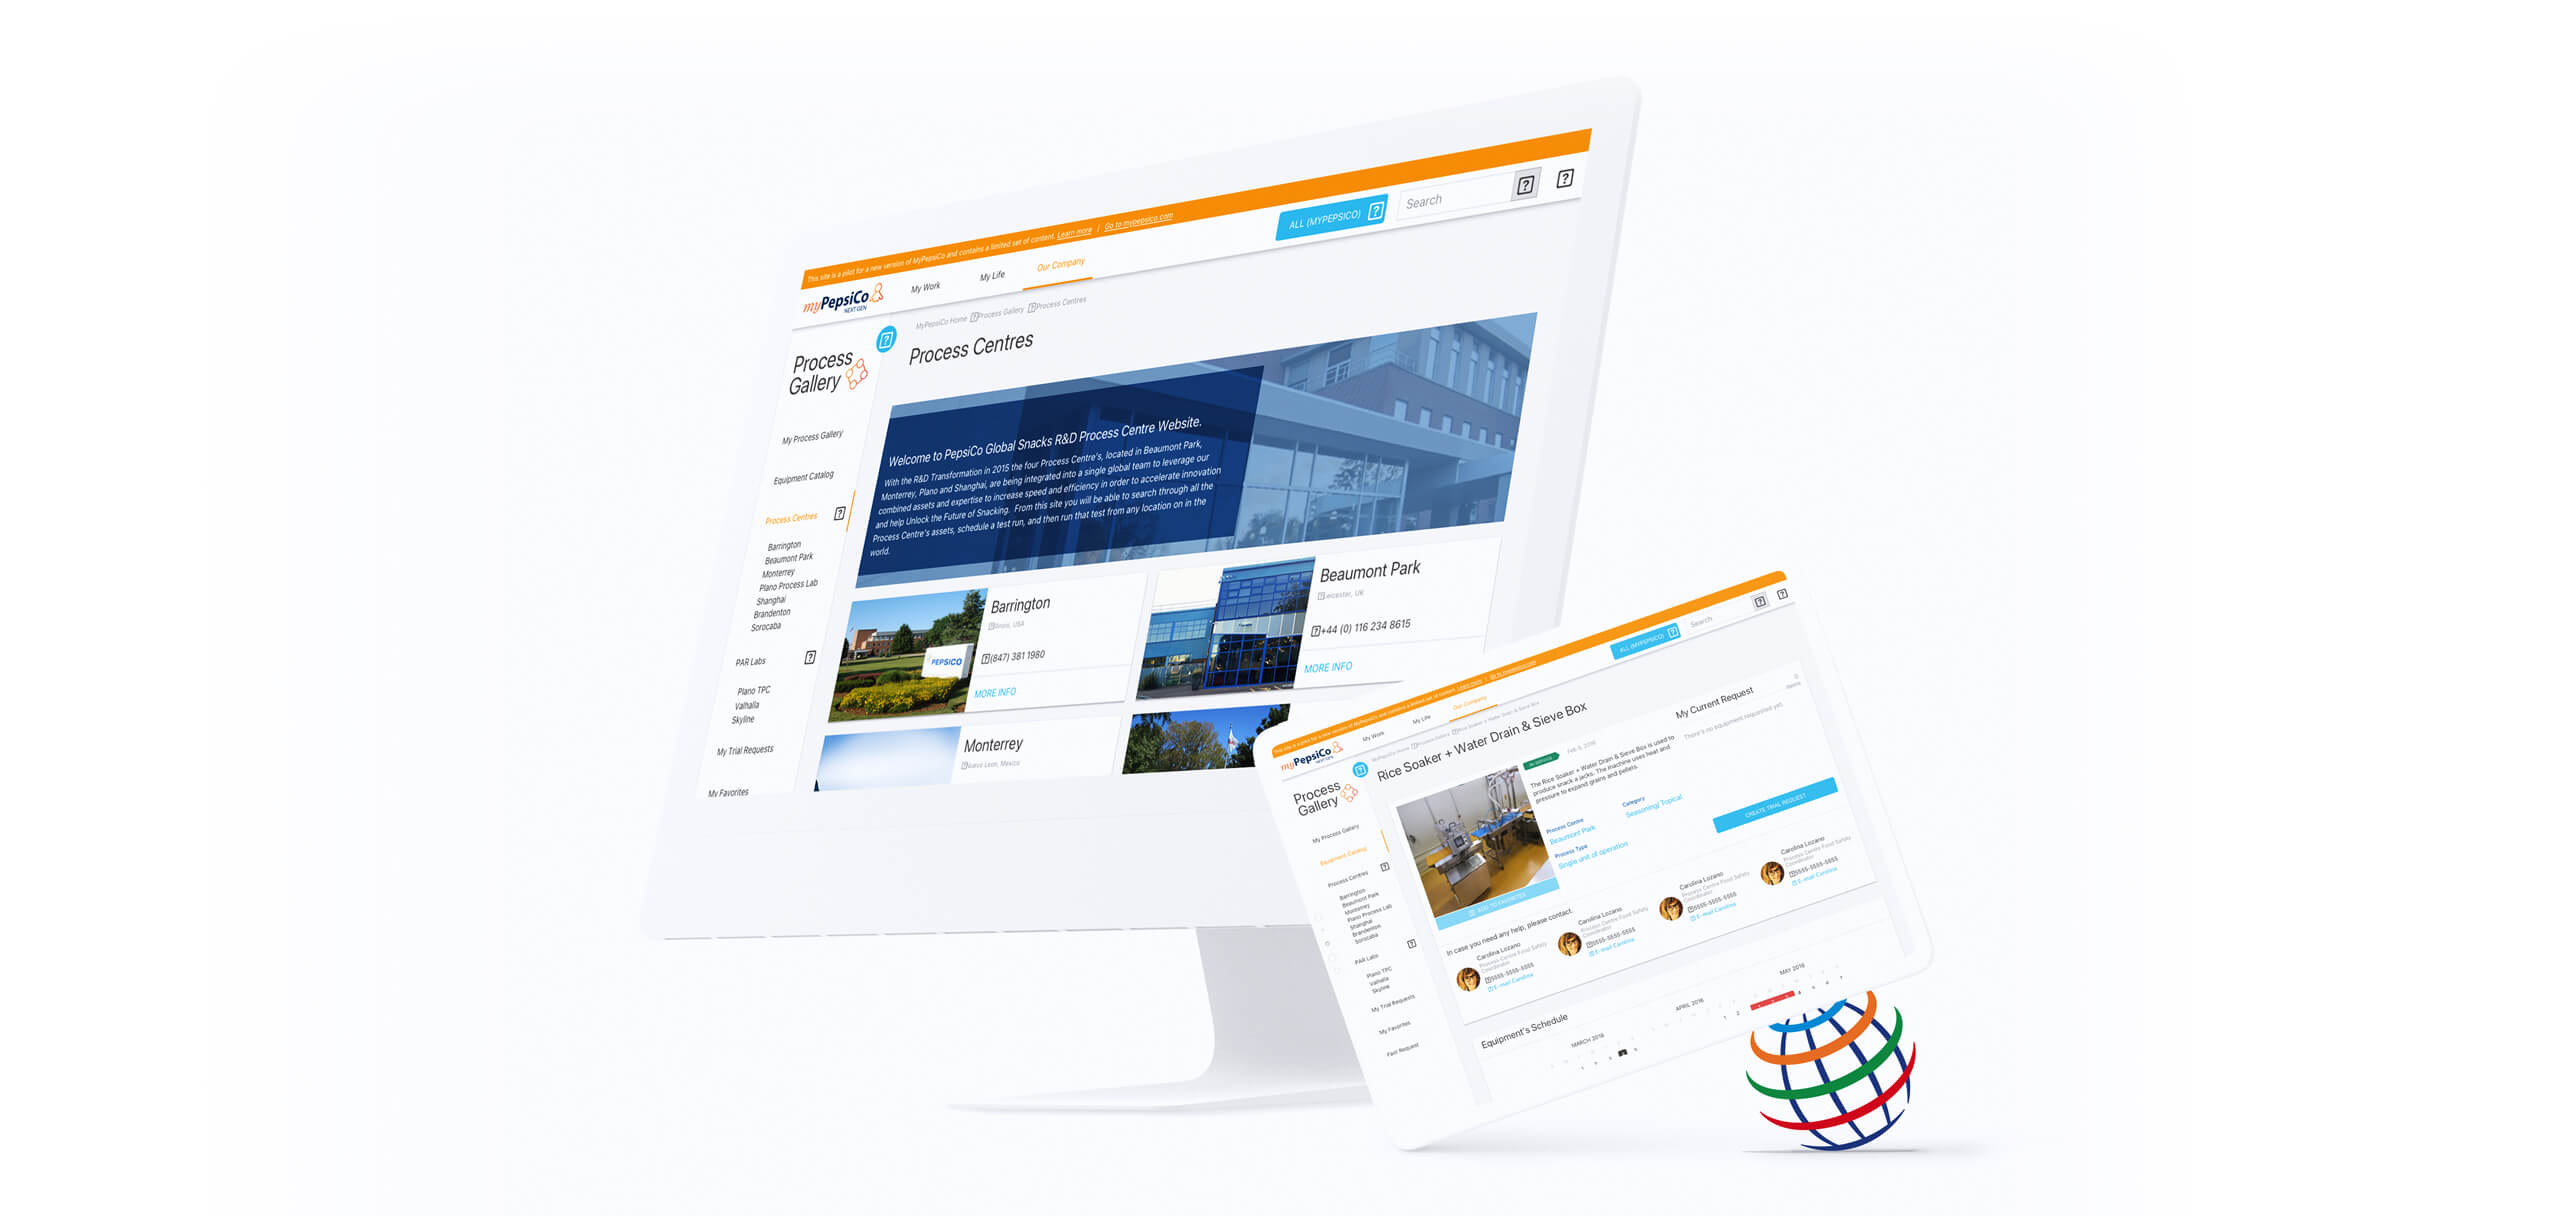 Base22 developed a global Intranet for PepsiCo